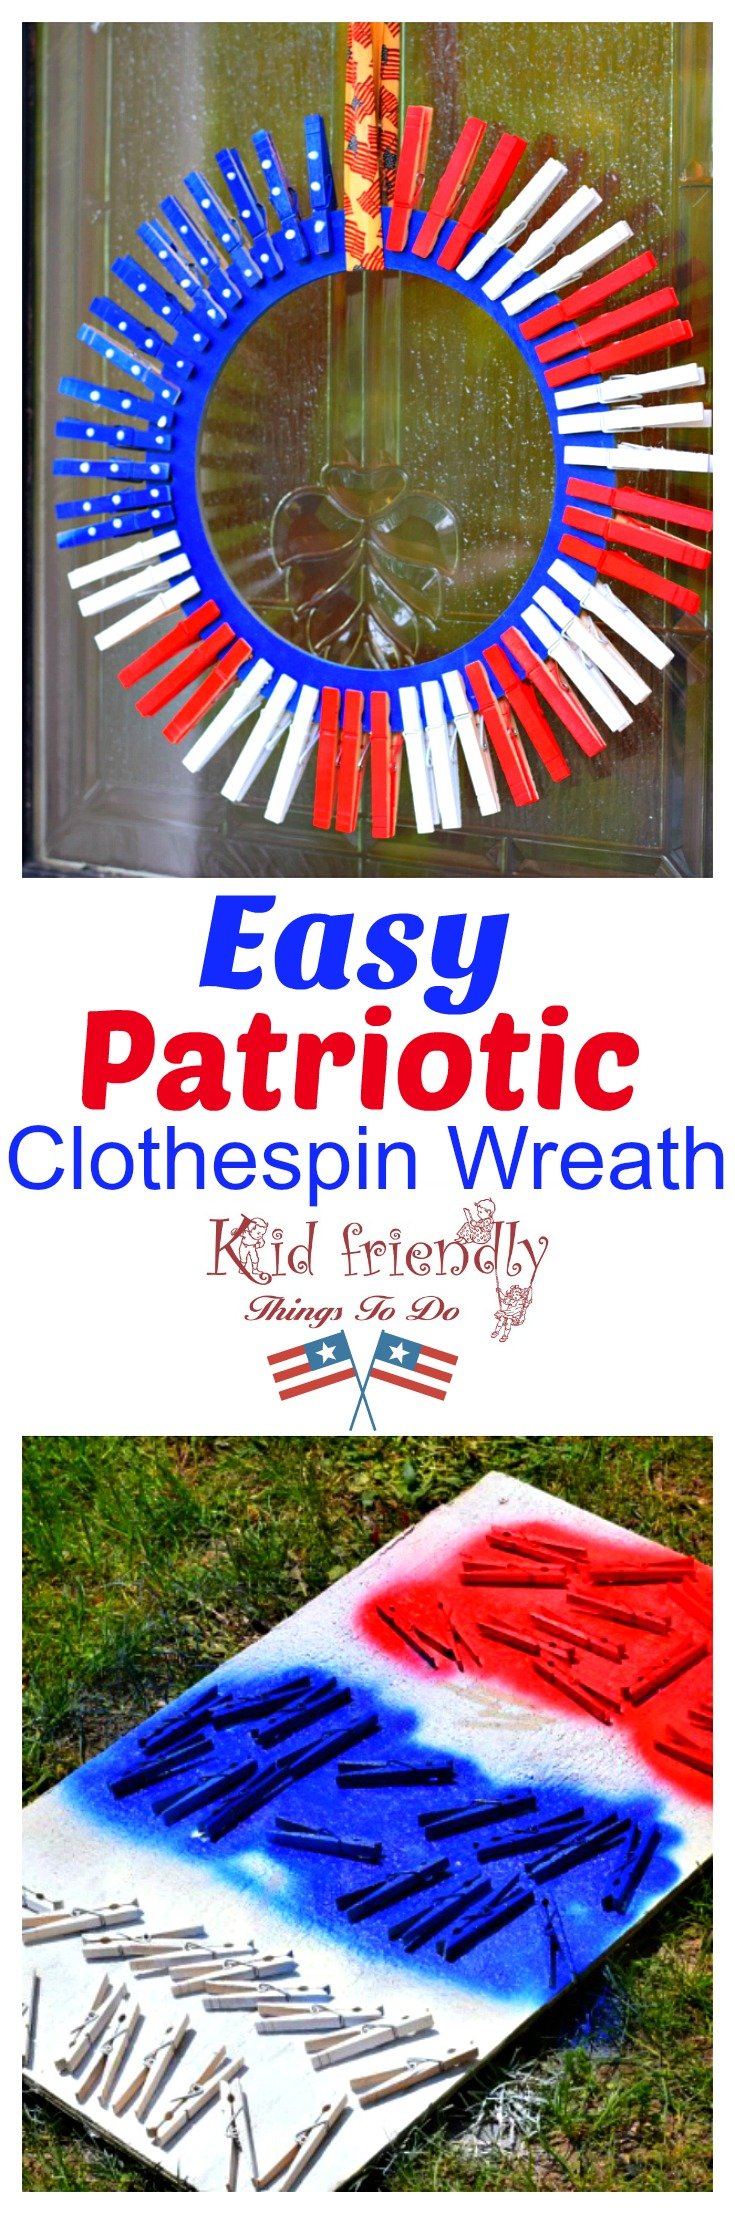 Easy 4th of July DIY Clothespin wreath.  fun to do with the kids! Make a clothespin patriotic  wreath for summer fun and a great decoration - www.kidfriendlythingstodo.com Memorial Day and Labor Day craft